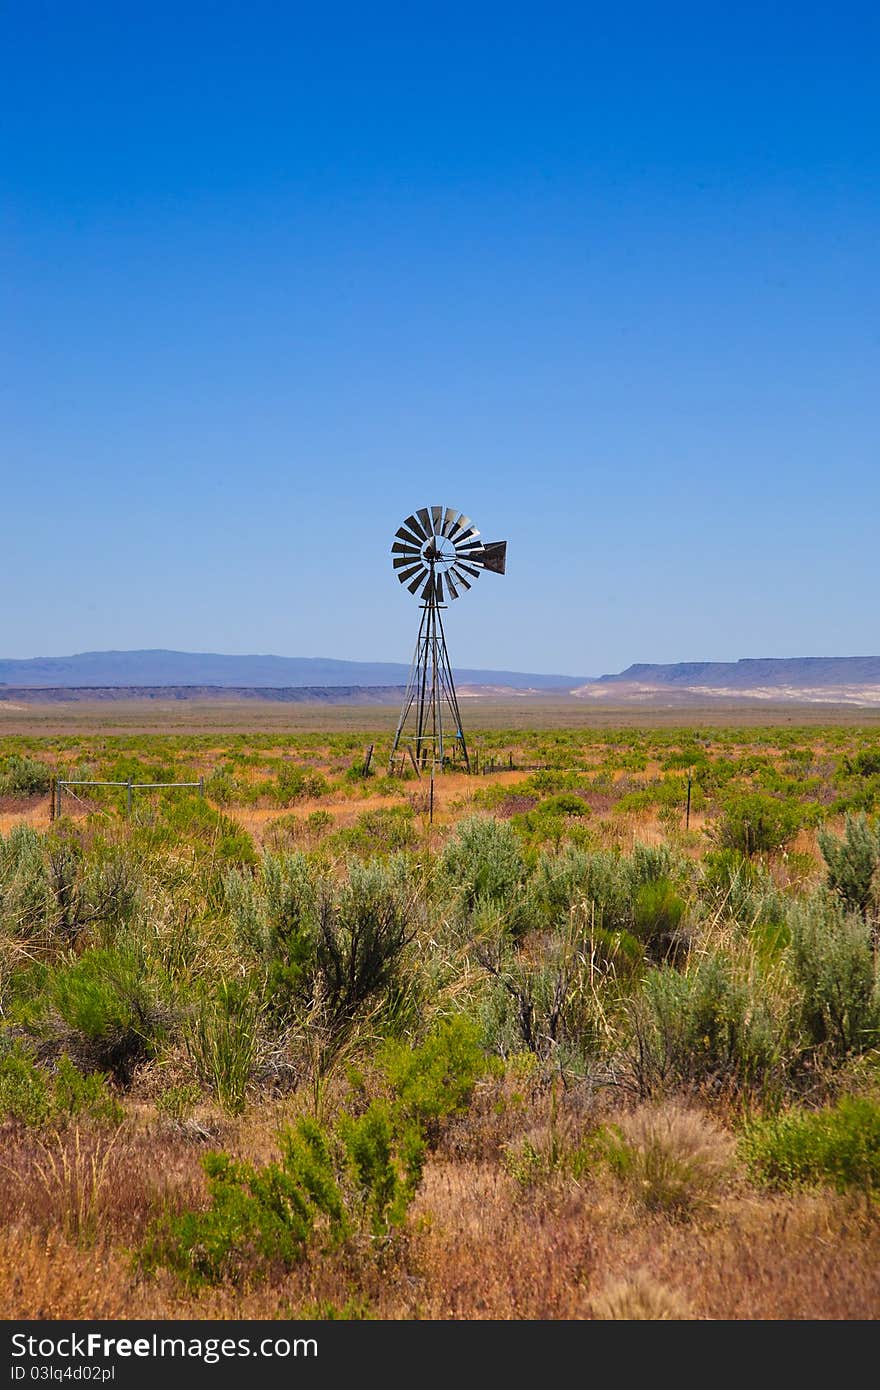 A scene in the western United States (Nevada), with an old-fashioned windmill, desert landscape and a bright blue sky. Lots of copy space. A scene in the western United States (Nevada), with an old-fashioned windmill, desert landscape and a bright blue sky. Lots of copy space.